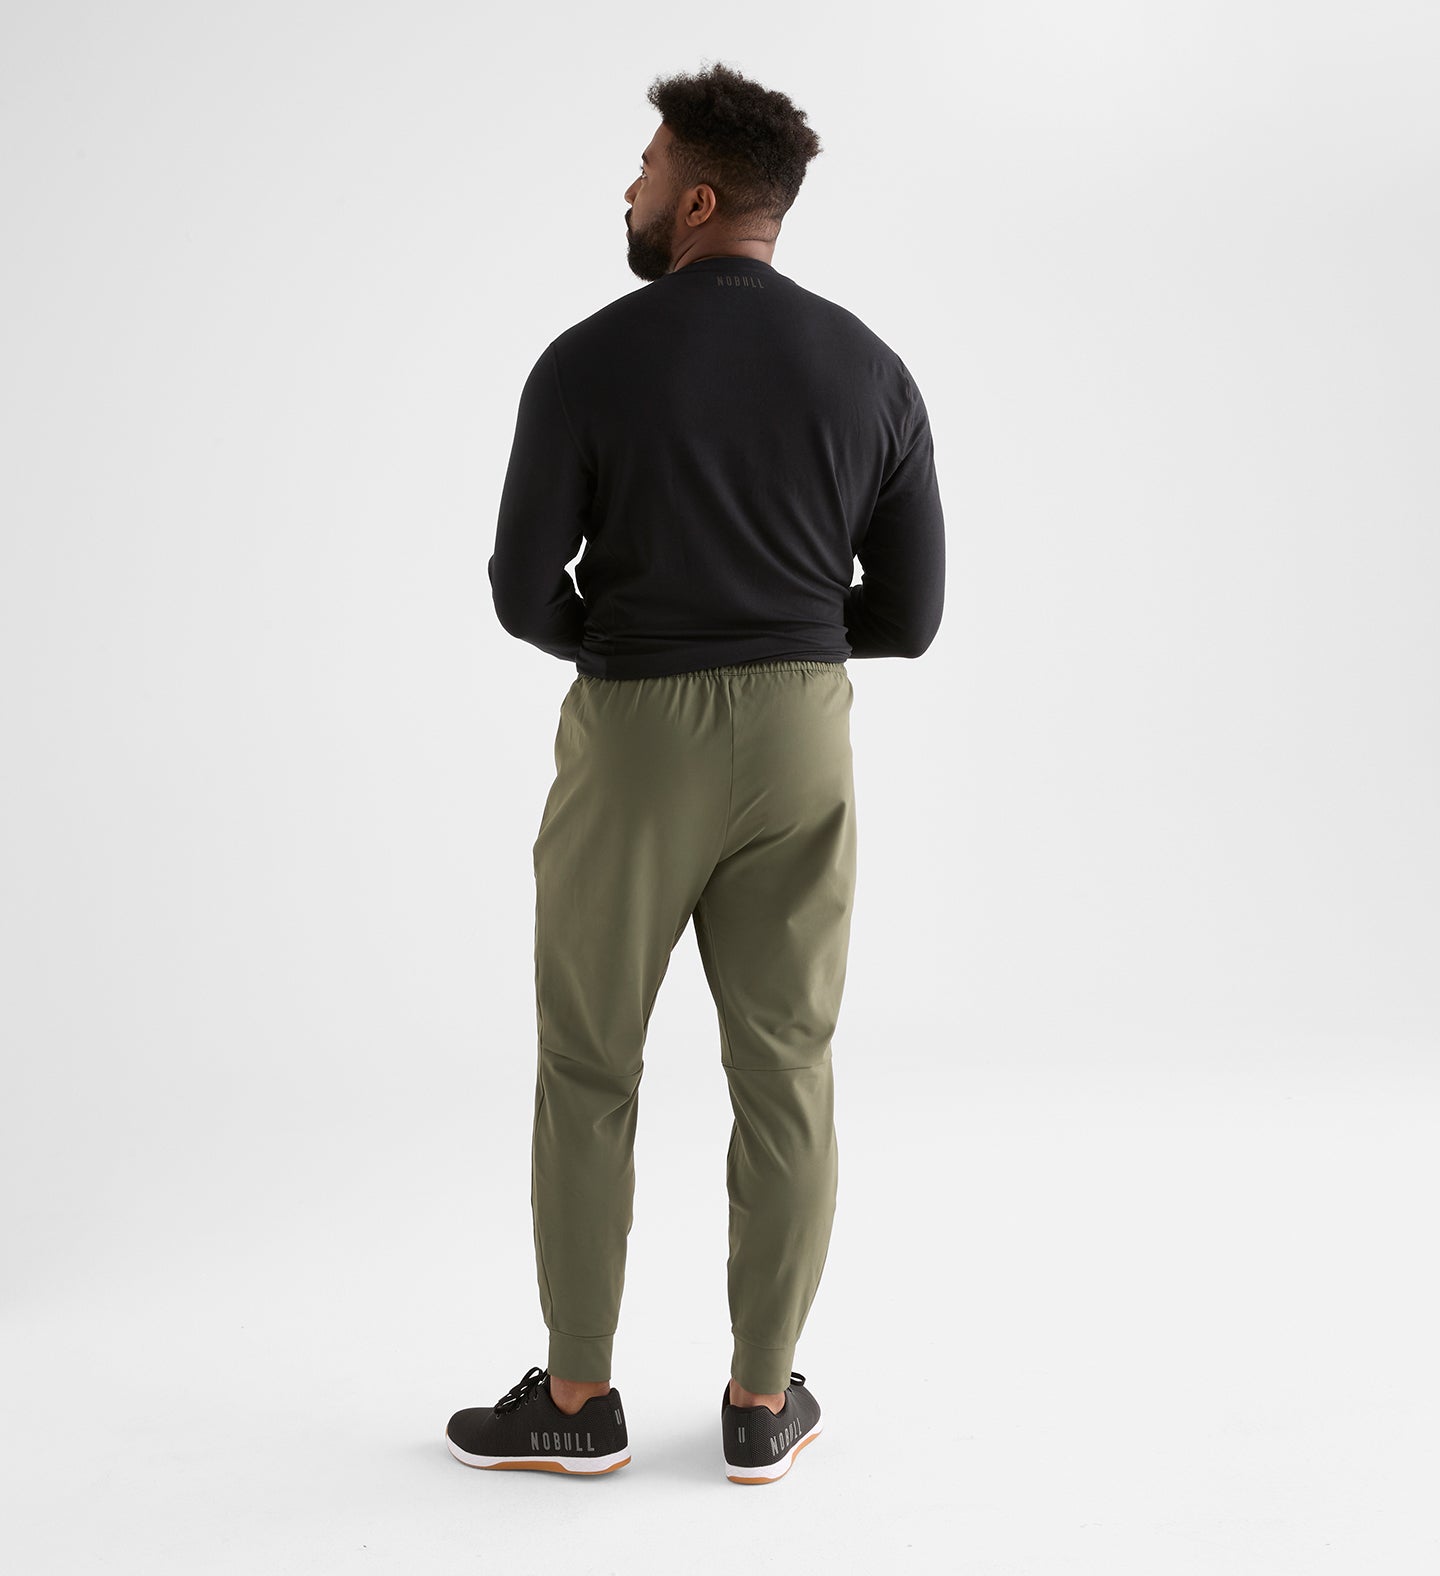 Woven Comfortable And Washable Olive Green Cargo Plain With Pocket Jogger  Pants For Men at Best Price in Akola | Om Textiles Agencies